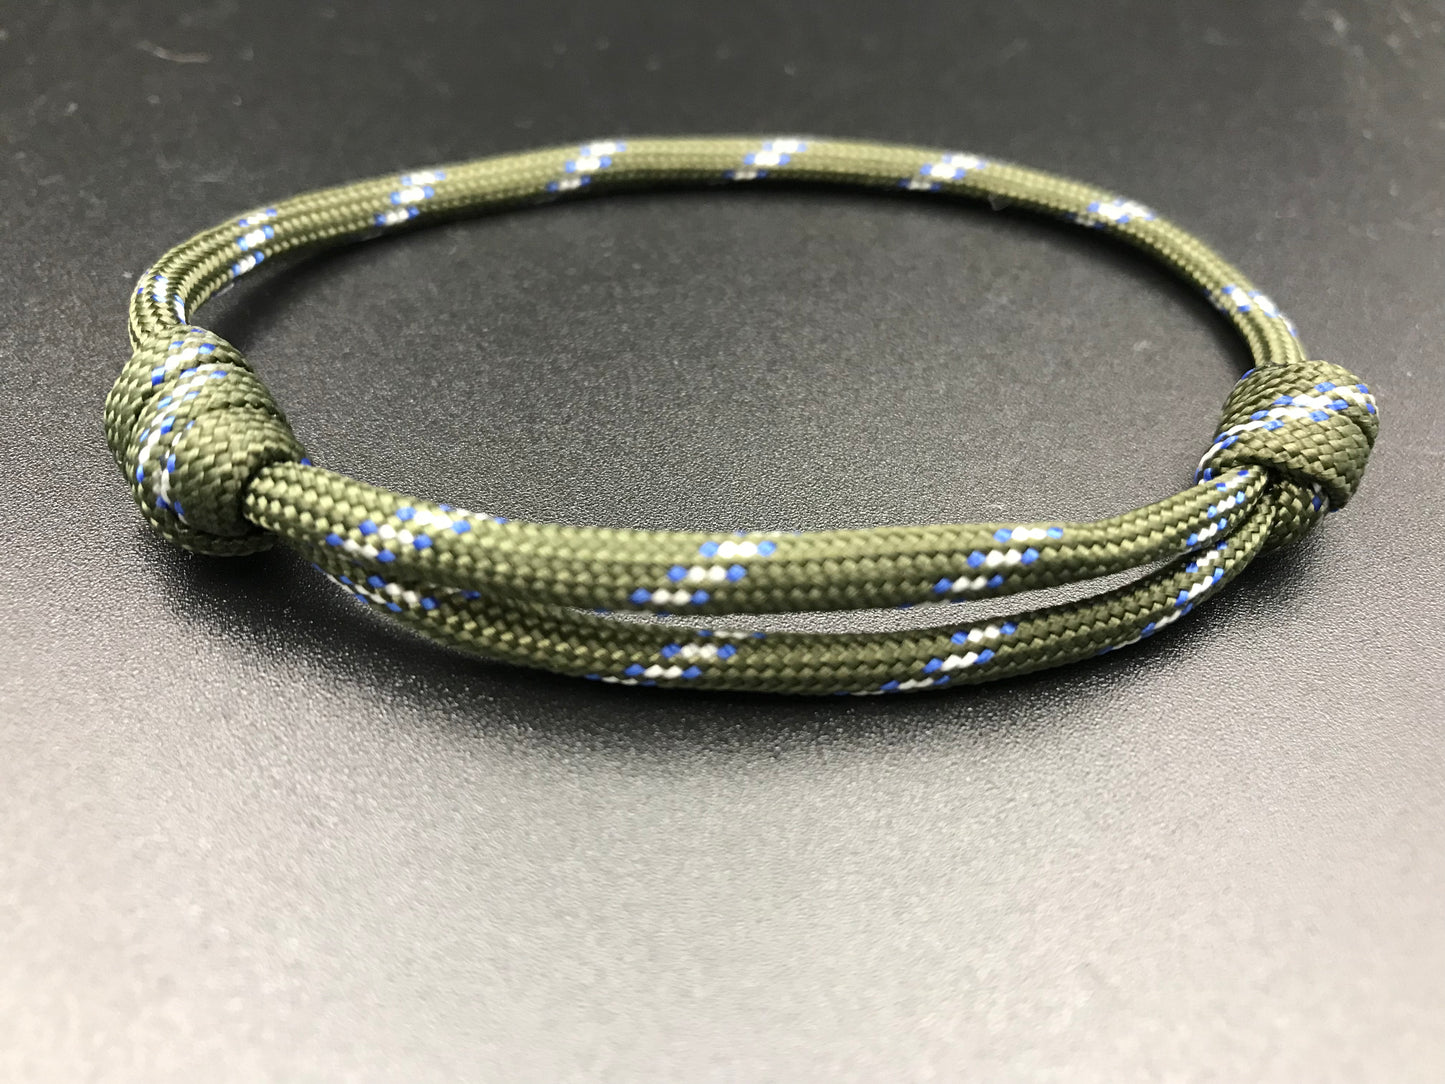 Paracord friendship bracelet In olive green - blue fleck light weight and adjustable